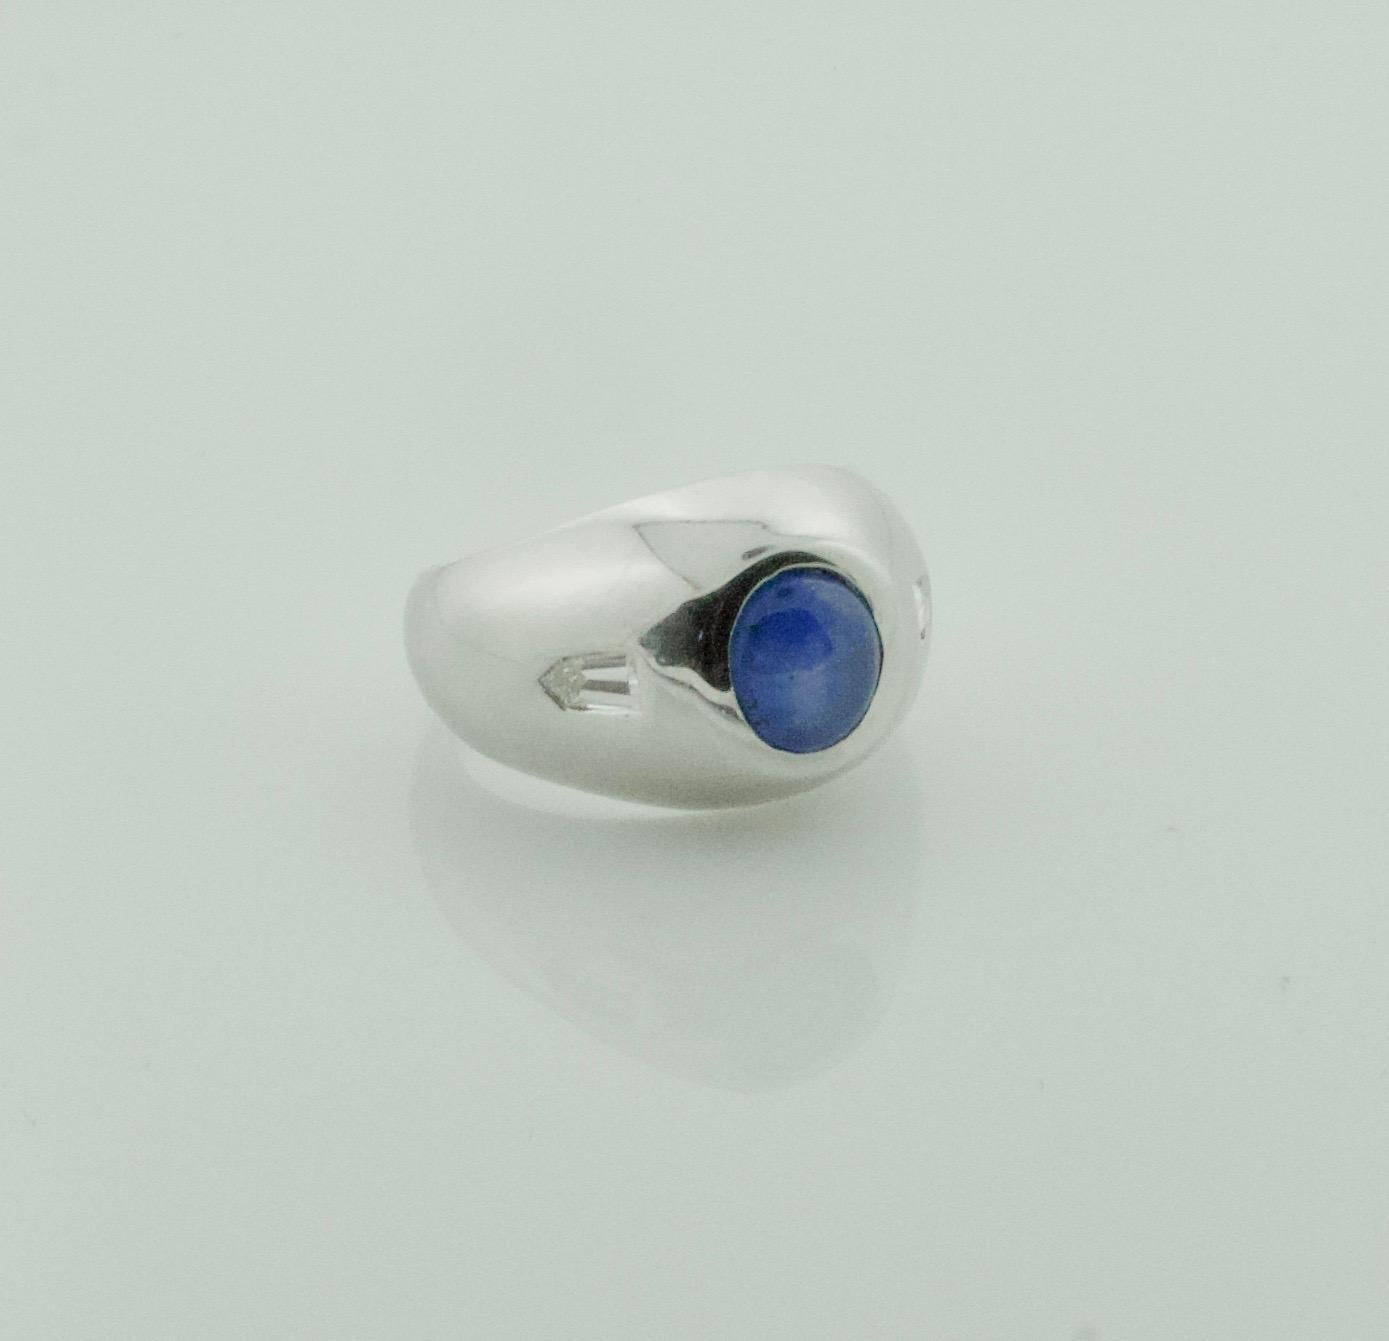 Star Sapphire and Diamond Pinky Ring in Platinum Circa 1940's
A Delightful Classic 
One Cabochon Star Sapphire Weighing 3.00 Carats Approximately [ A Vibrant Blue With a Nice Star That is Hard To Capture in Photos]
Two Bullet Cut Diamonds Weighing